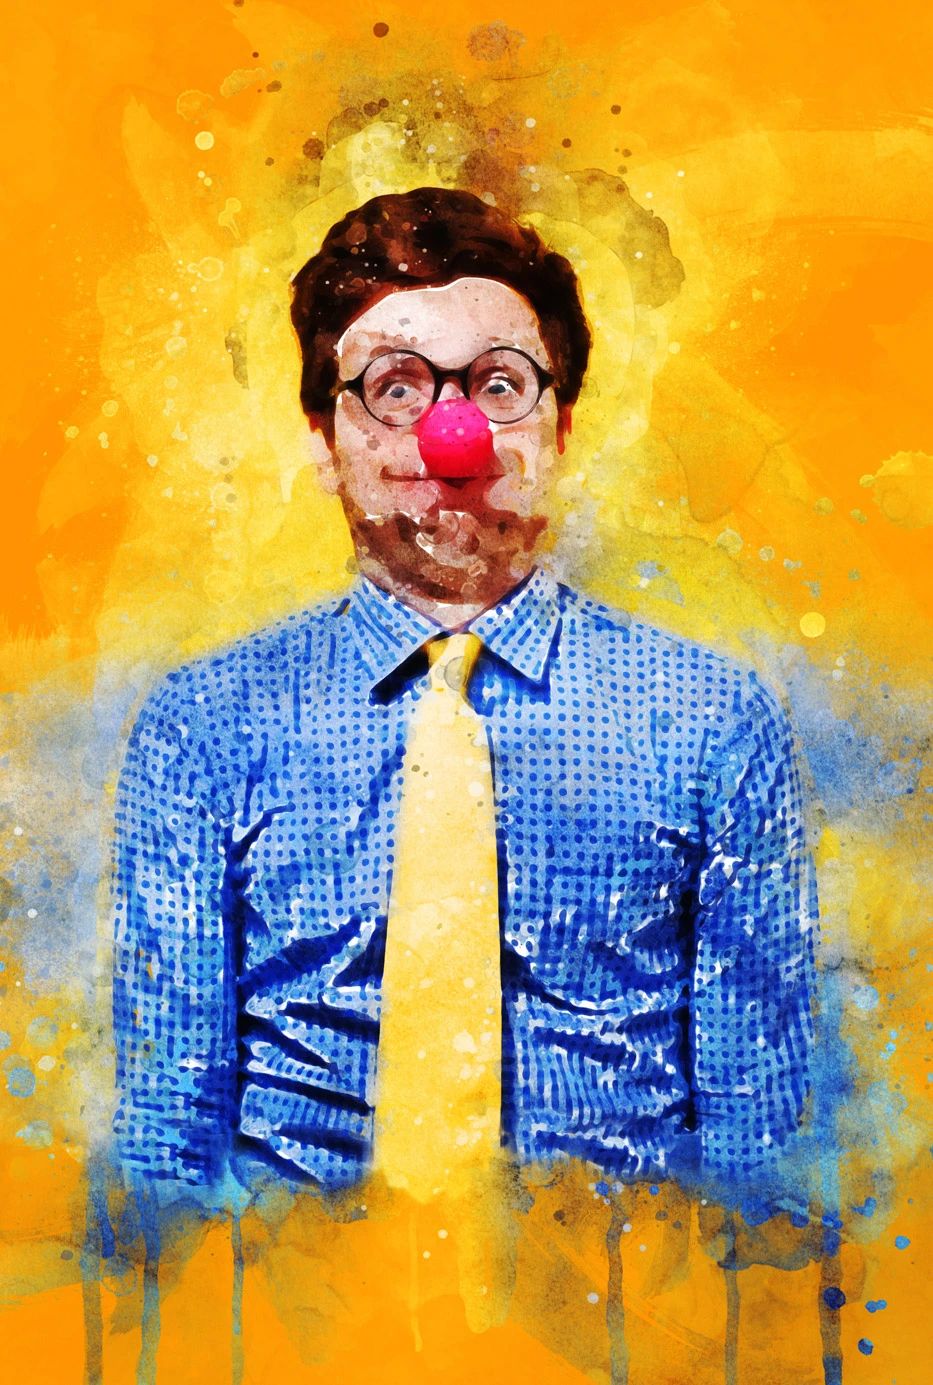 Picture with a yellow background in an abstract way with a man wearing a clown nose, a blue shirt and a yellow tie looking surprised.